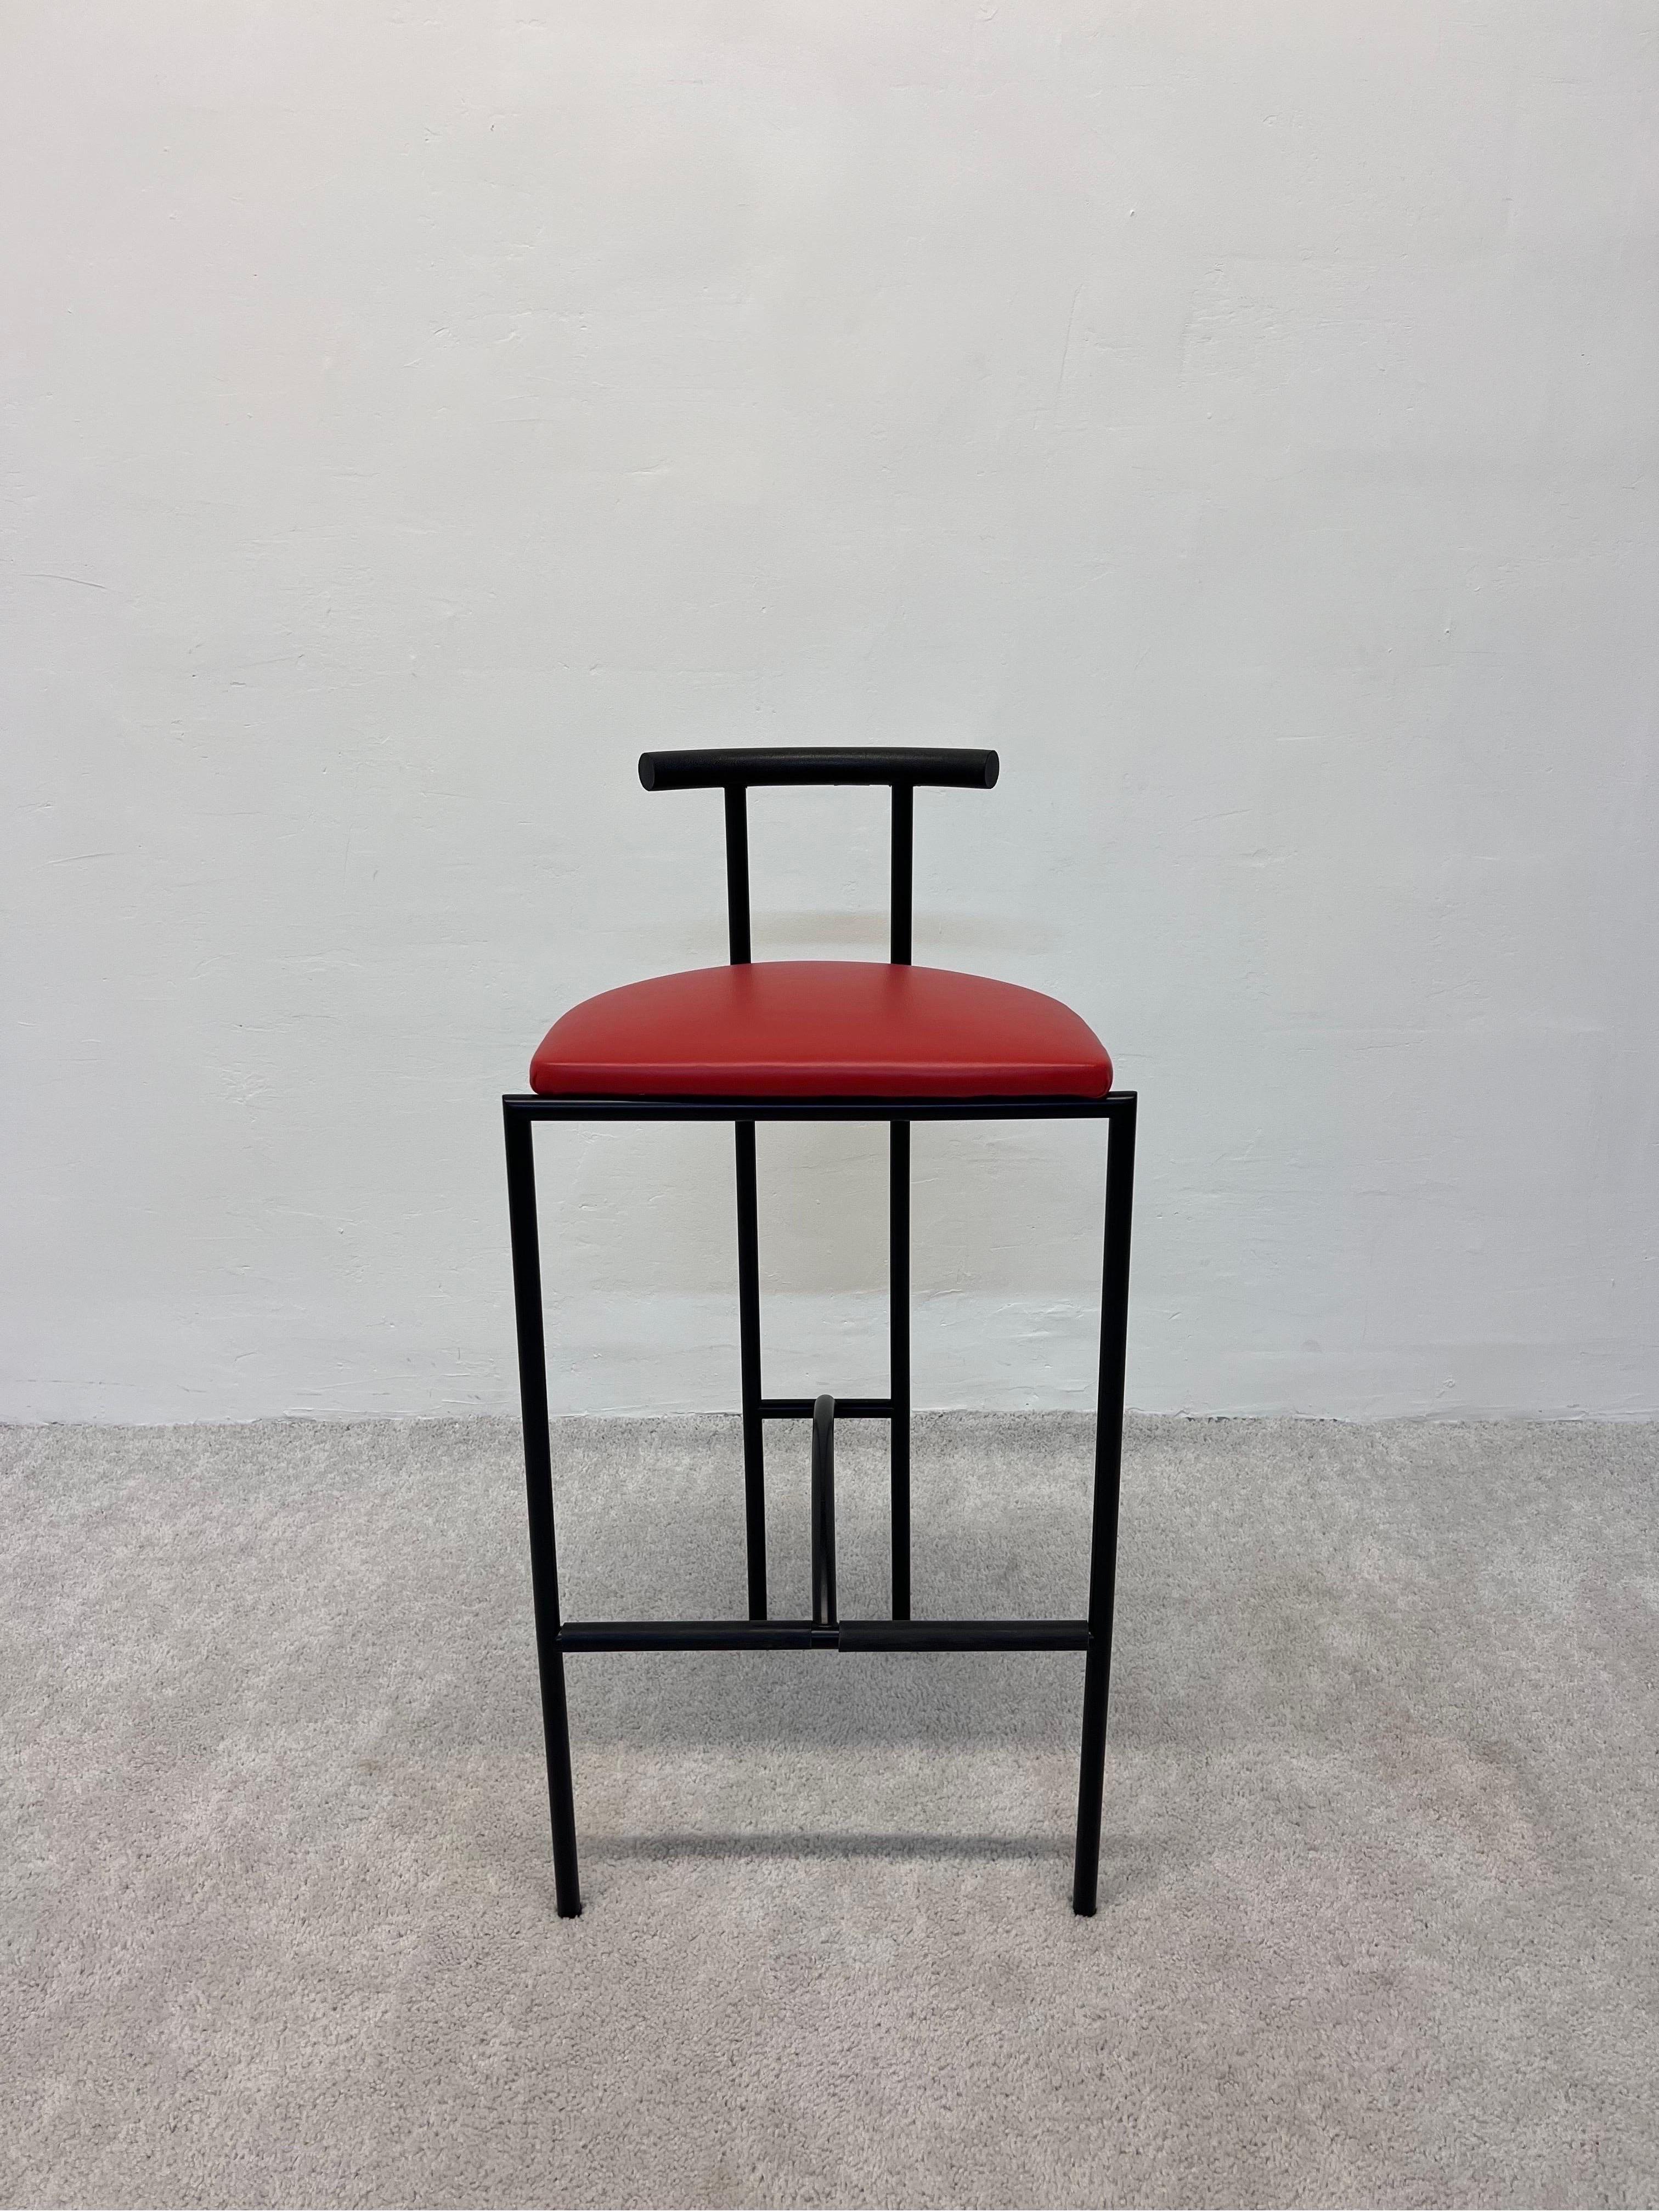 Postmodern Tokyo counter stool made of a satin black steel frame, curved black polyurethane backrest and a red naugahyde cushioned seat. The footrest maintains the plastic tube protectors. Designed by Rodney Kinsman circa 1980s and manufactured by